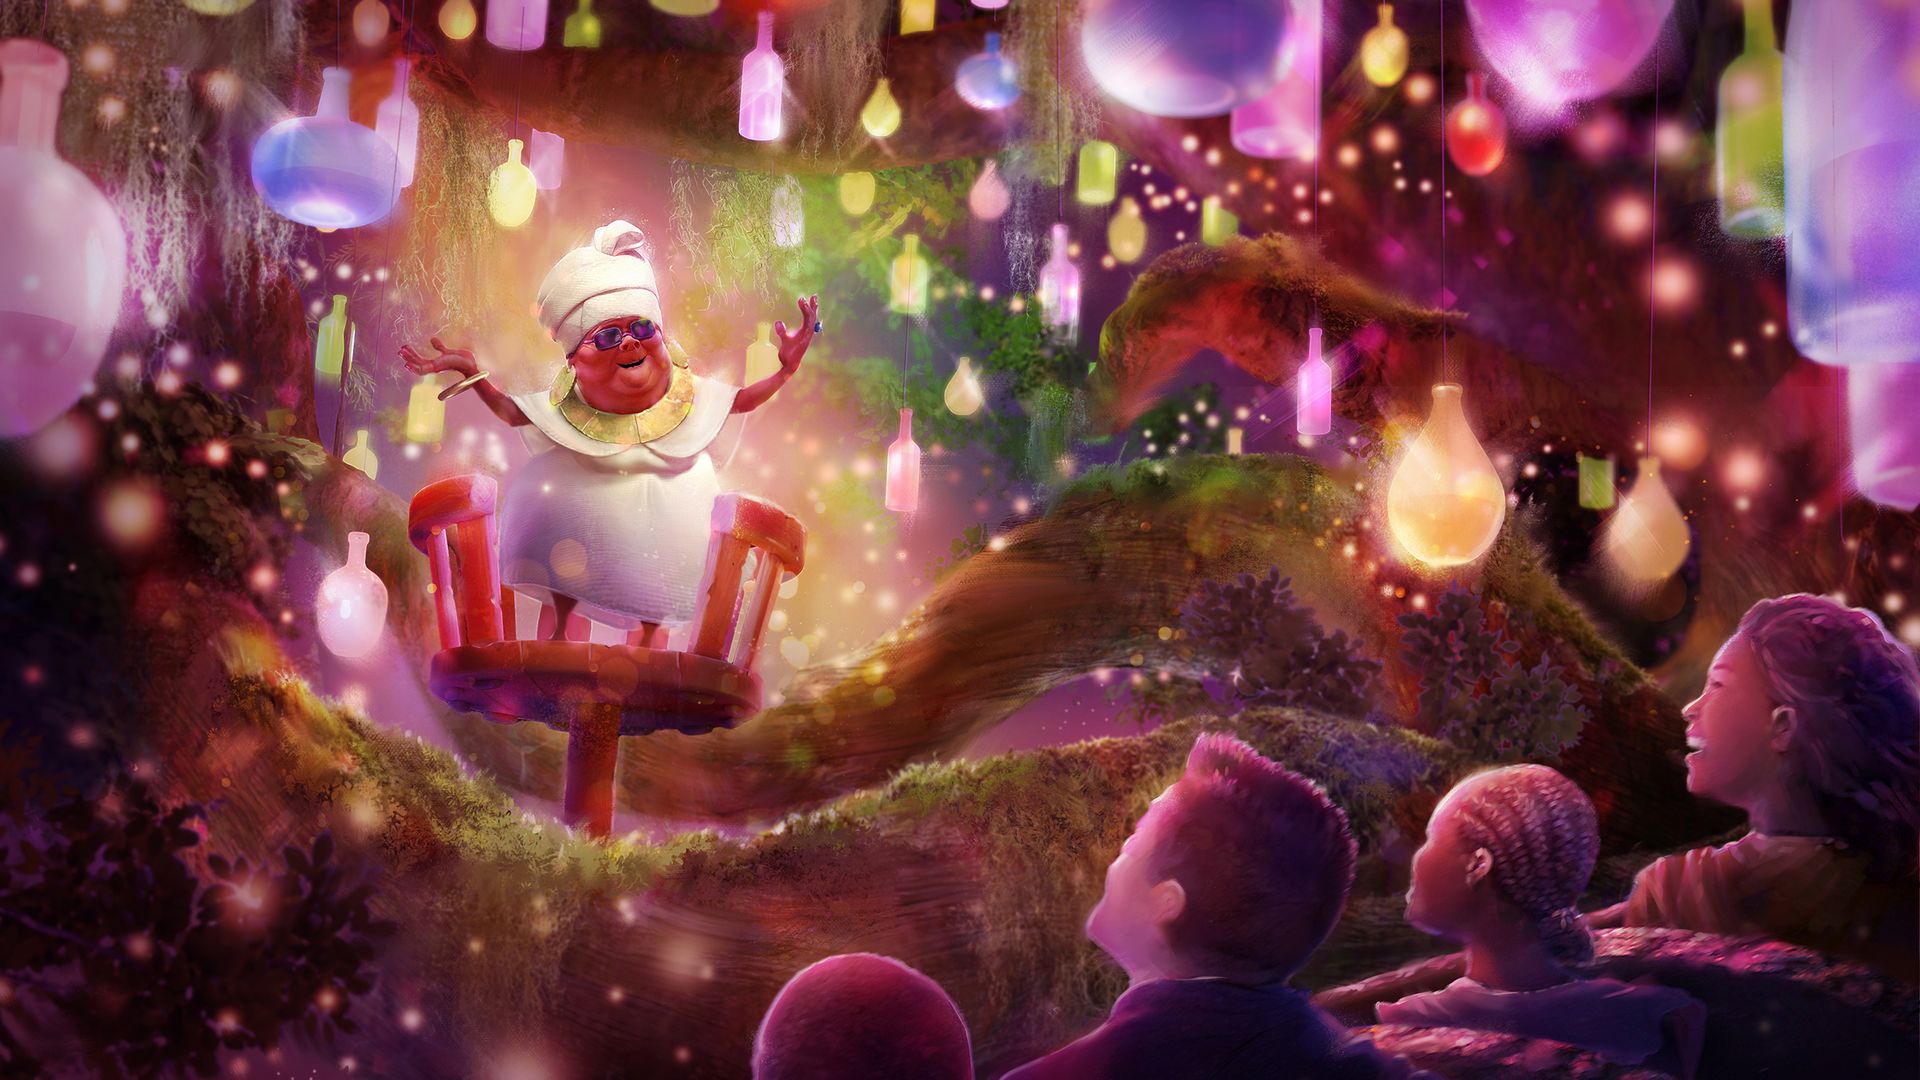 Image is a rendering from Disney that shows what the new Princess Tiana ride could look like. Mama Odie is in a tree surrounded by lanterns while people in a log flume turn to look at her.